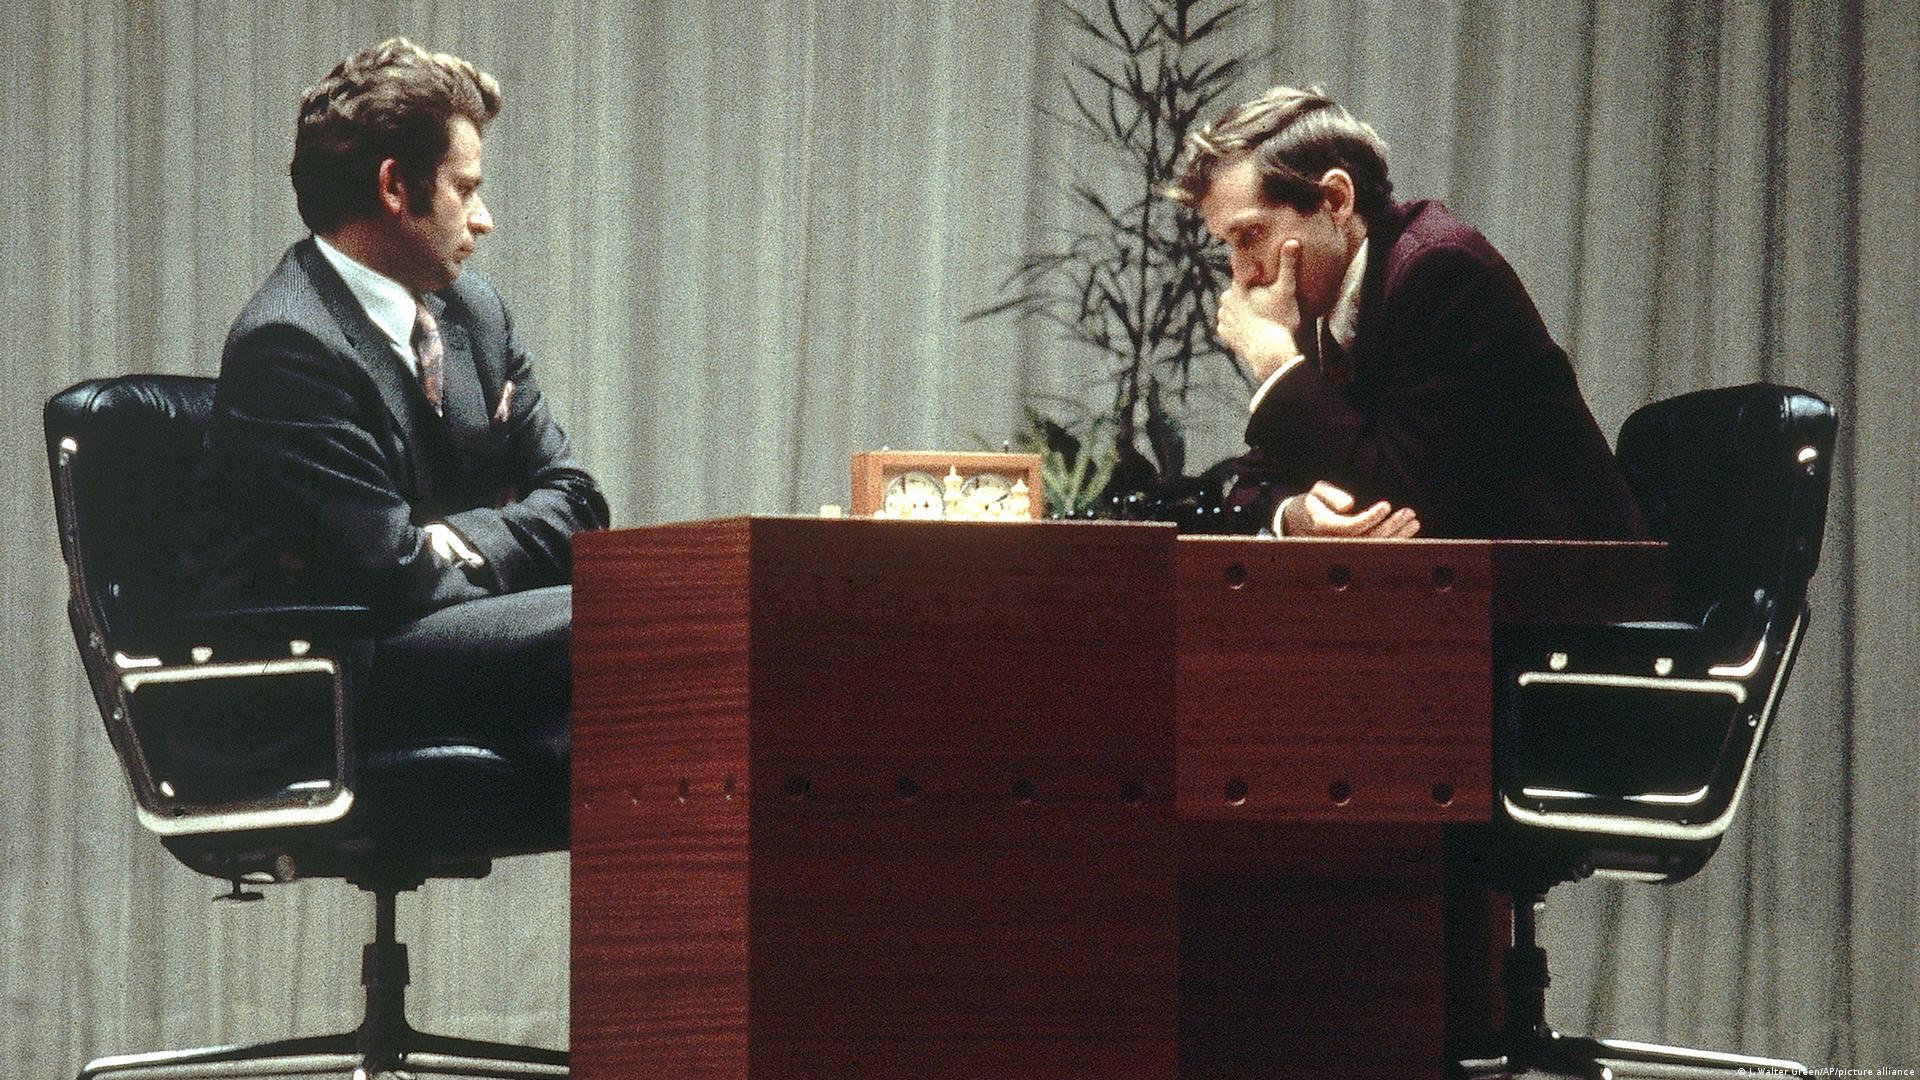 Bobby Fischer, a famous chess player, became increasingly paranoid